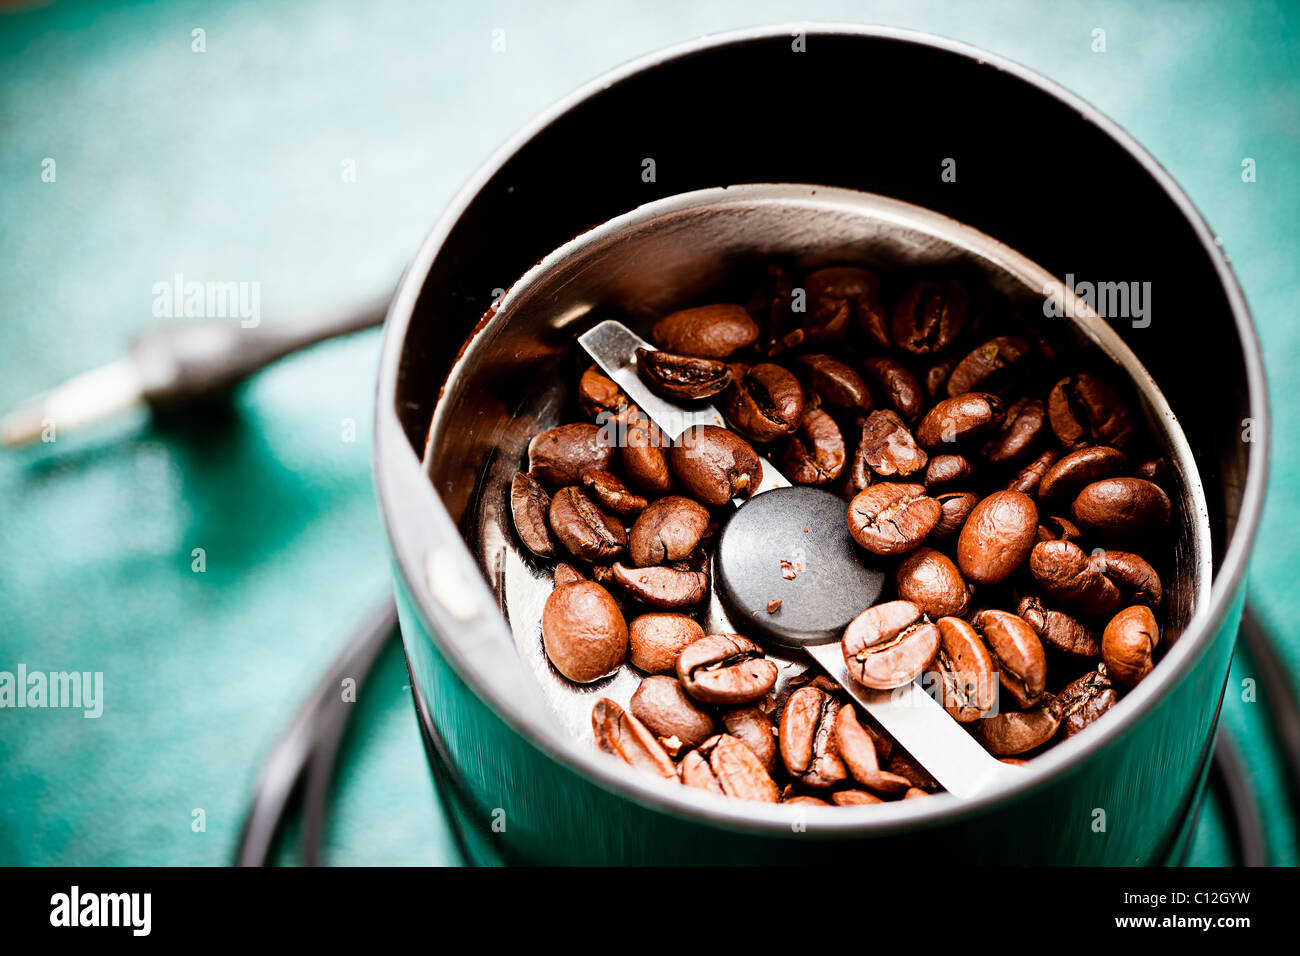 https://c8.alamy.com/comp/C12GYW/electrical-coffee-mill-machine-with-roasted-coffee-beans-on-the-green-C12GYW.jpg